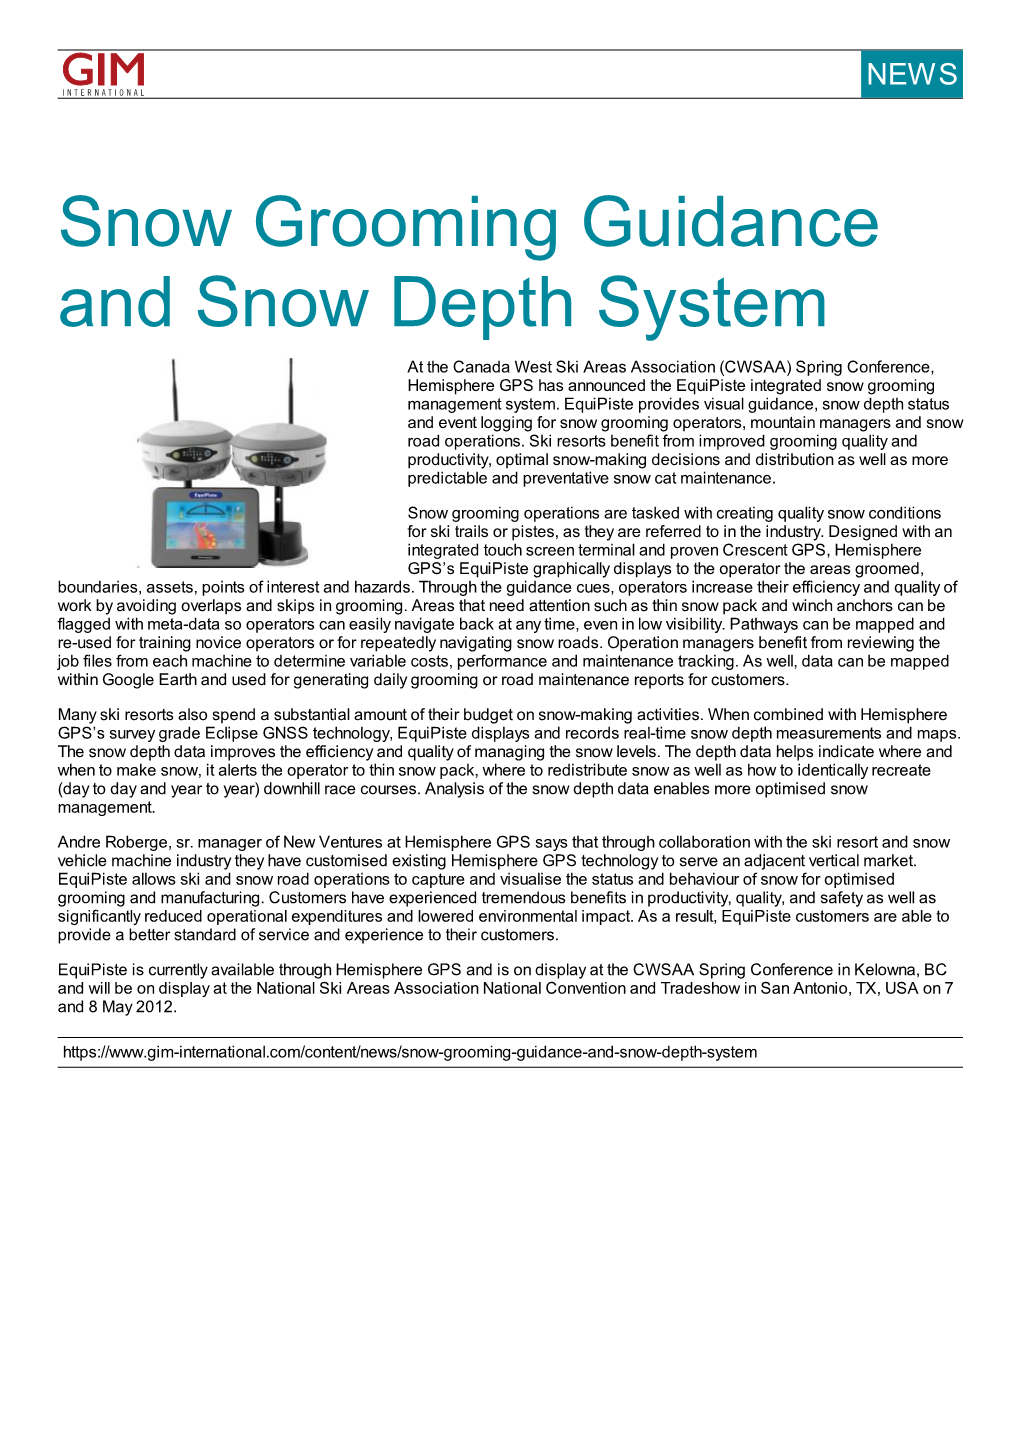 Snow Grooming Guidance and Snow Depth System